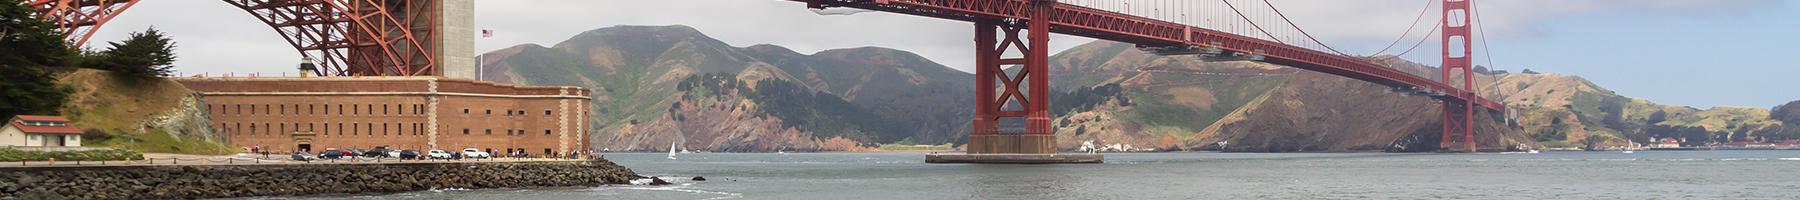 View of Fort Point underneath Golden Gate Bridge with big and strong iron chain link fence along the SF Bay